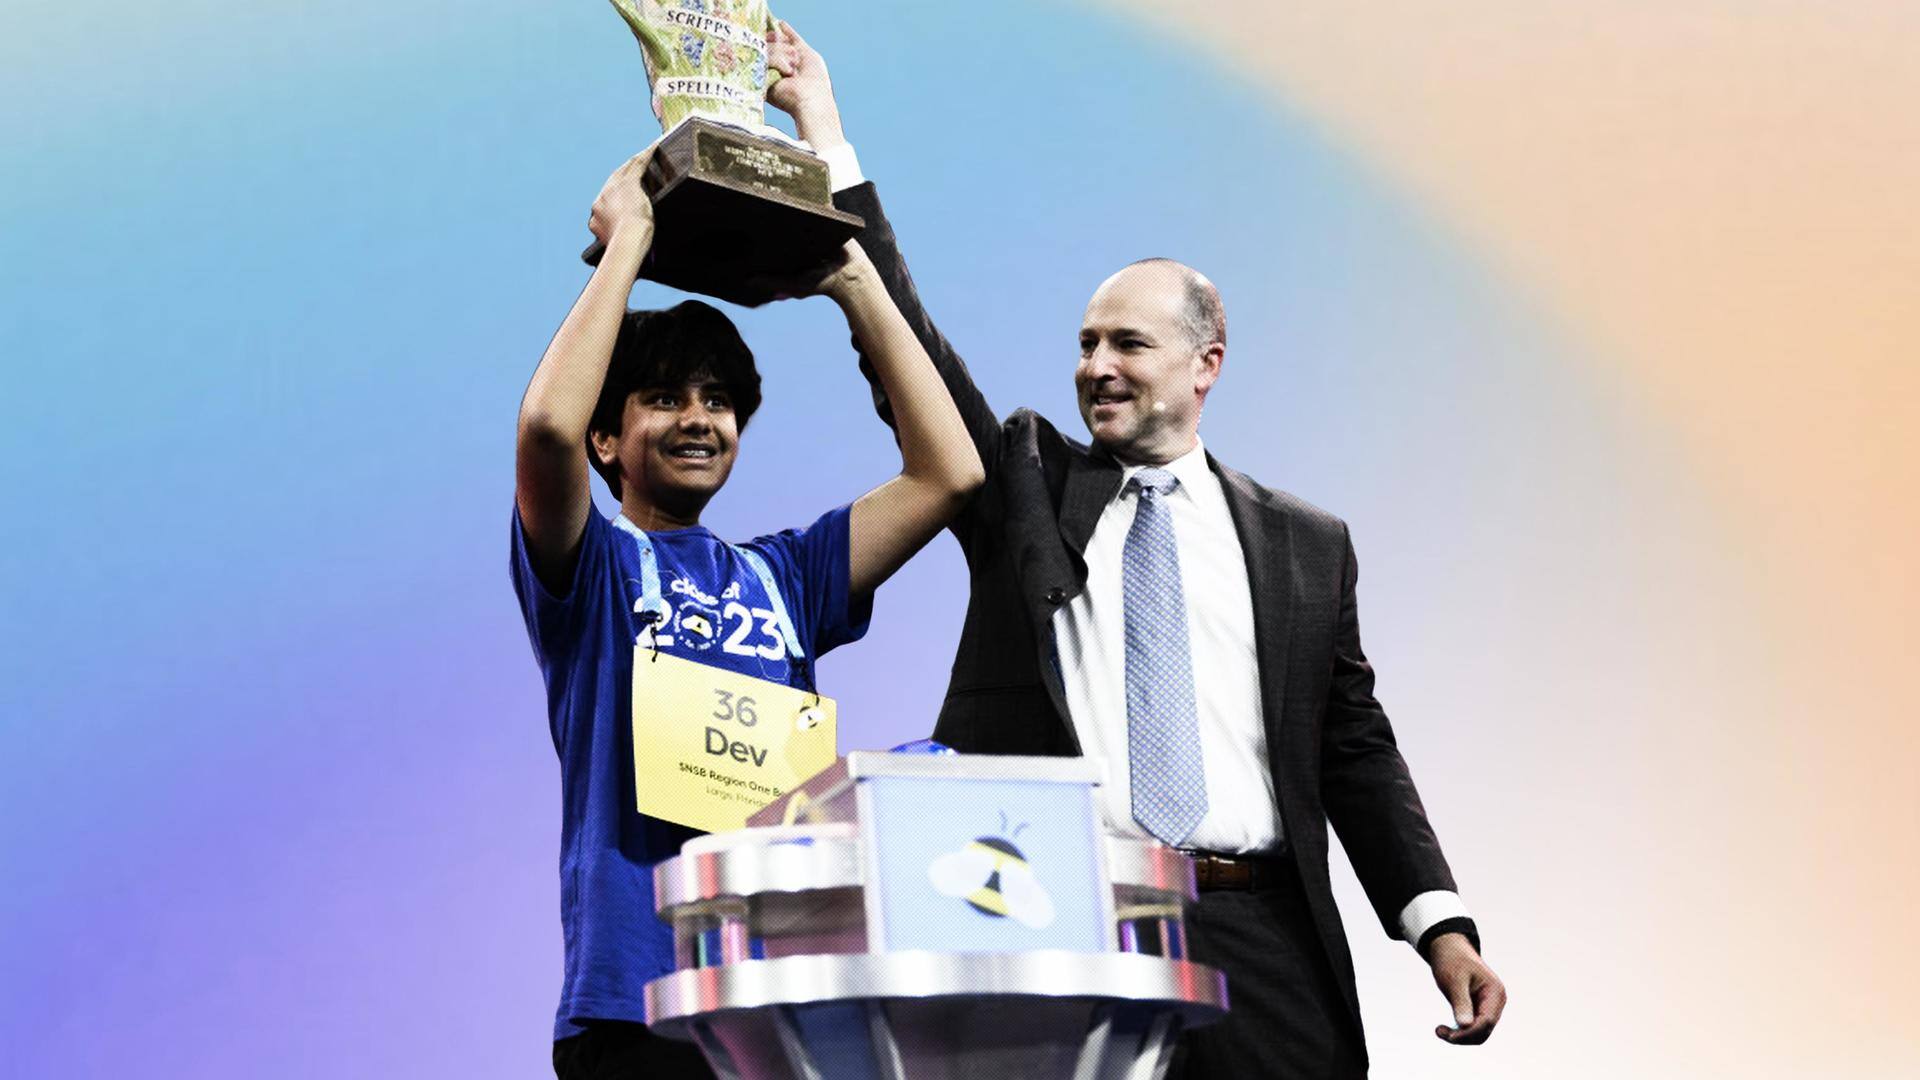 14-year-old Indian-American Dev Shah wins the coveted US Spelling Bee